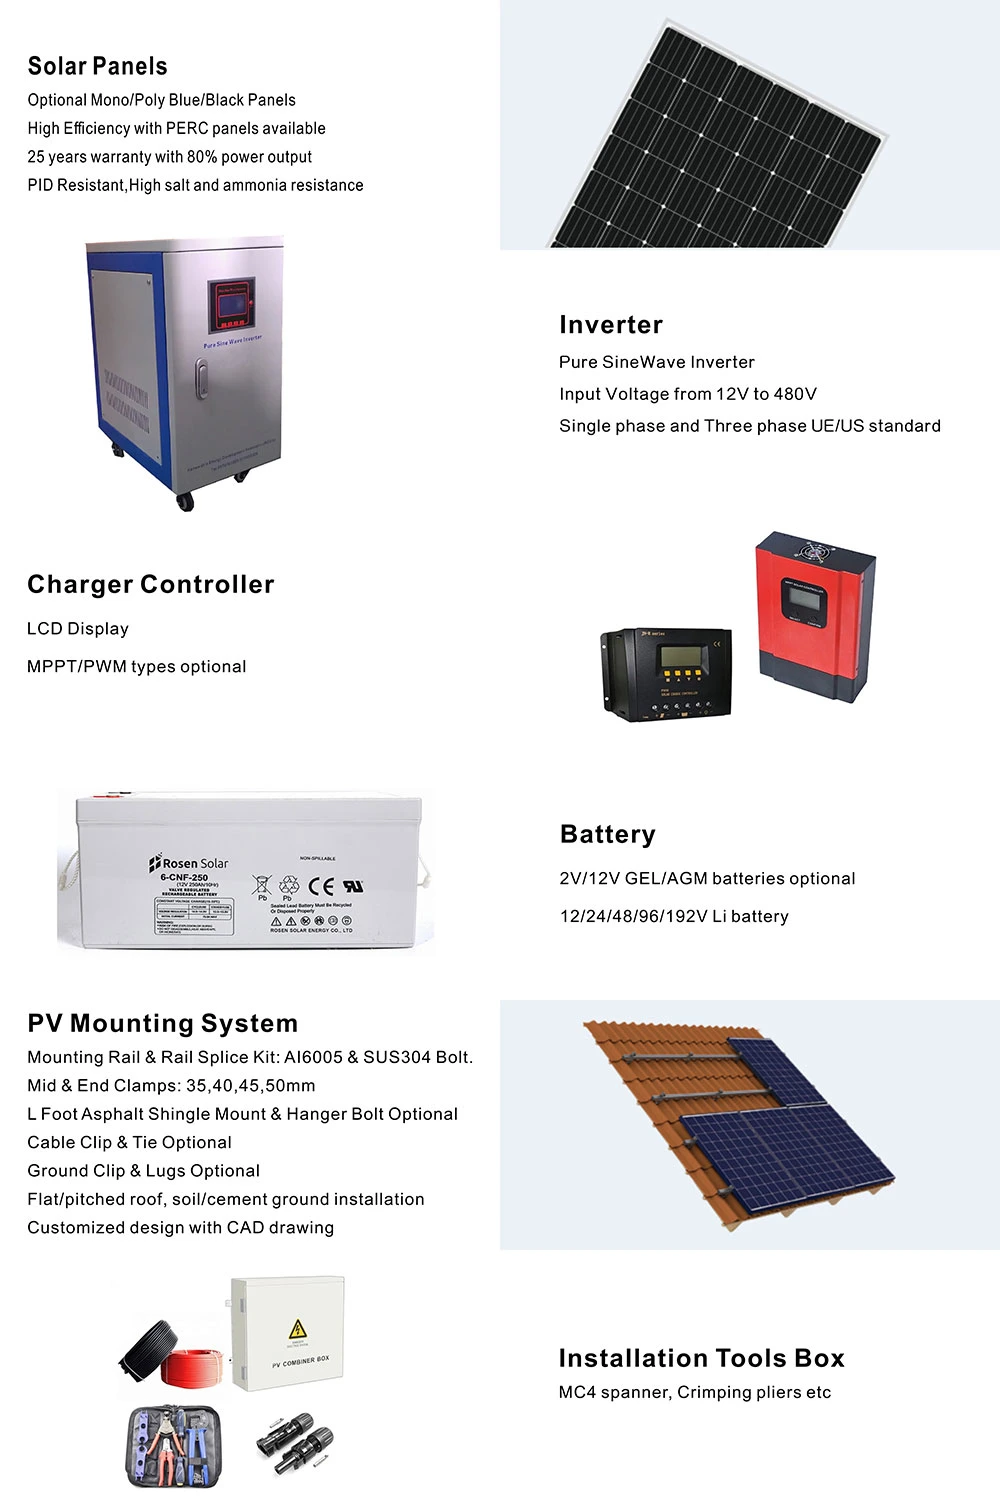 Wholesale House 2kw Solar Panel Power System with off Grid Inverter